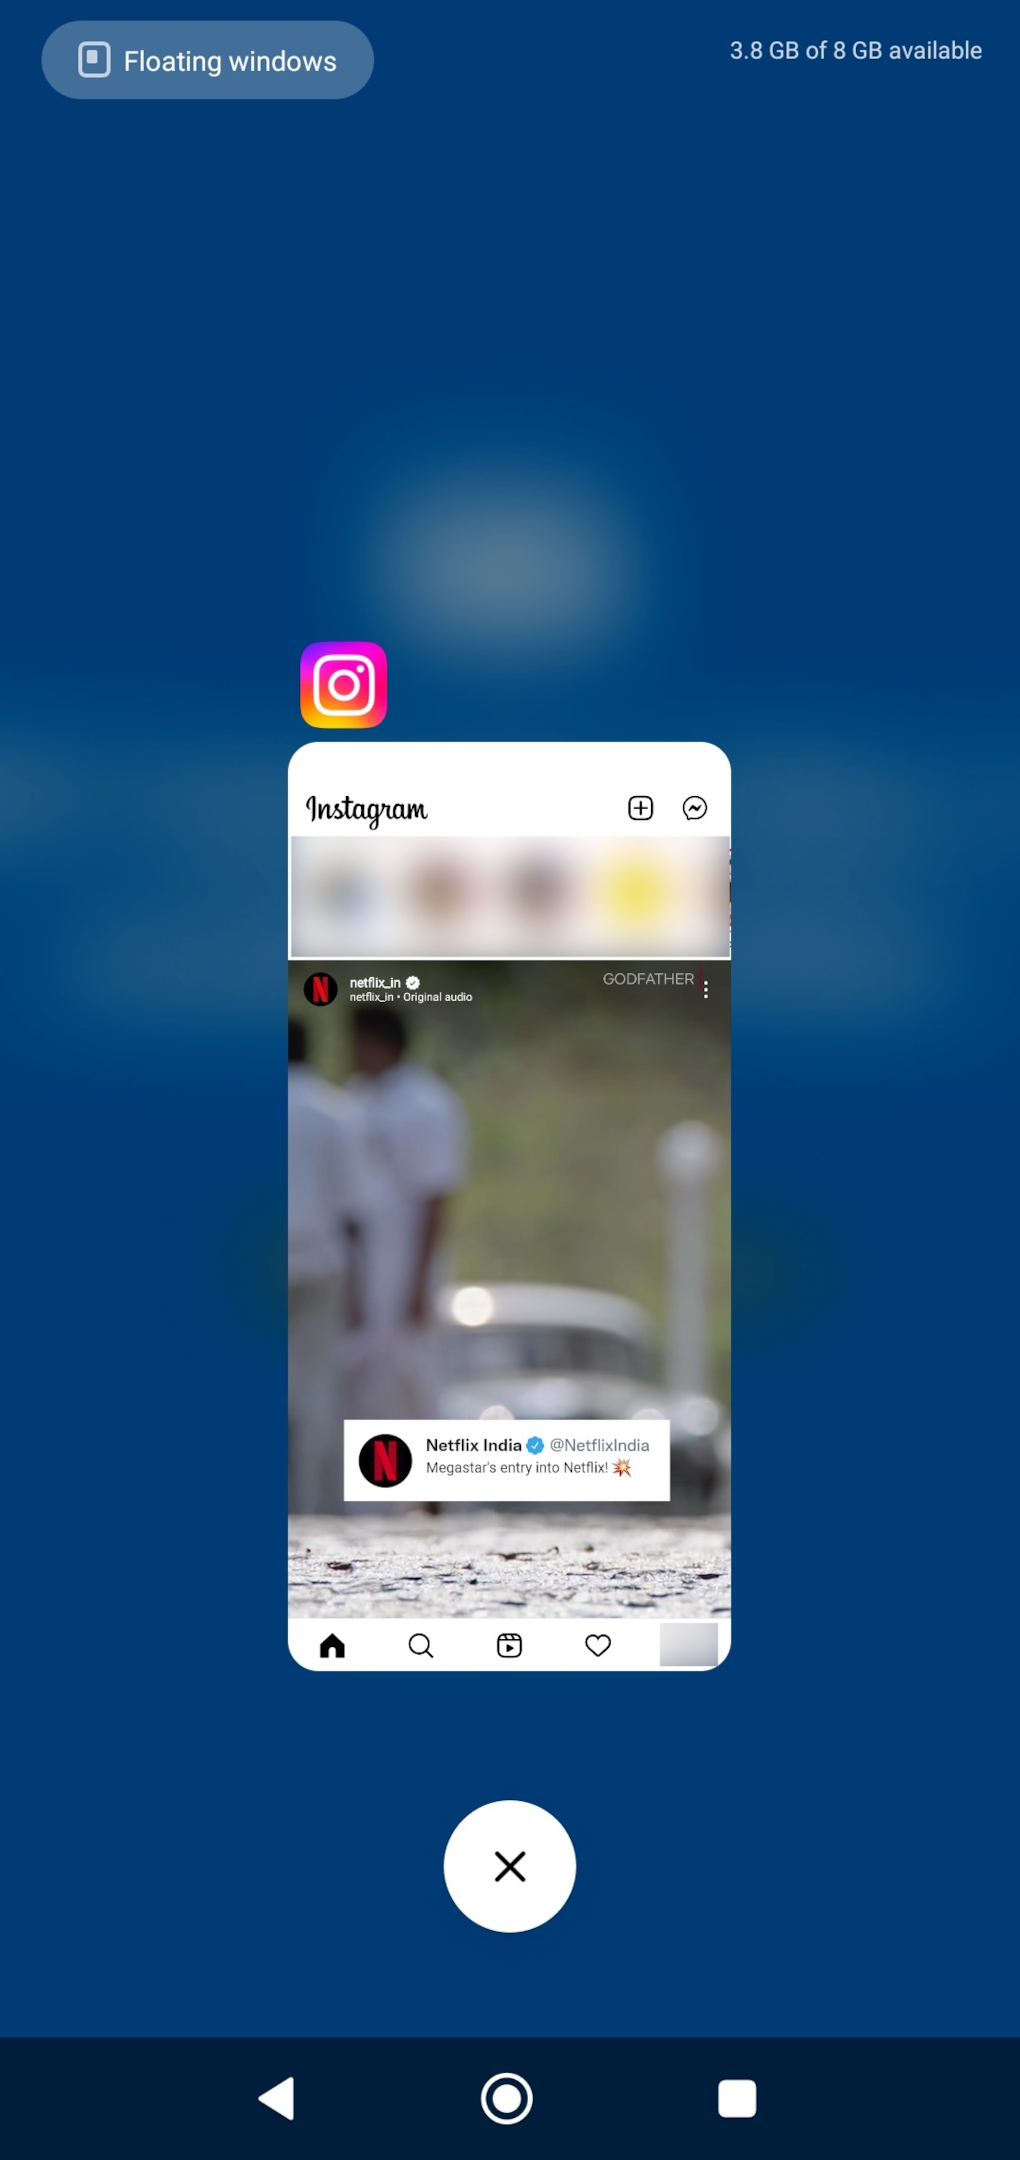 Remote.tools shows how to remove instagram app from recents to fix instagram direct message notification issue